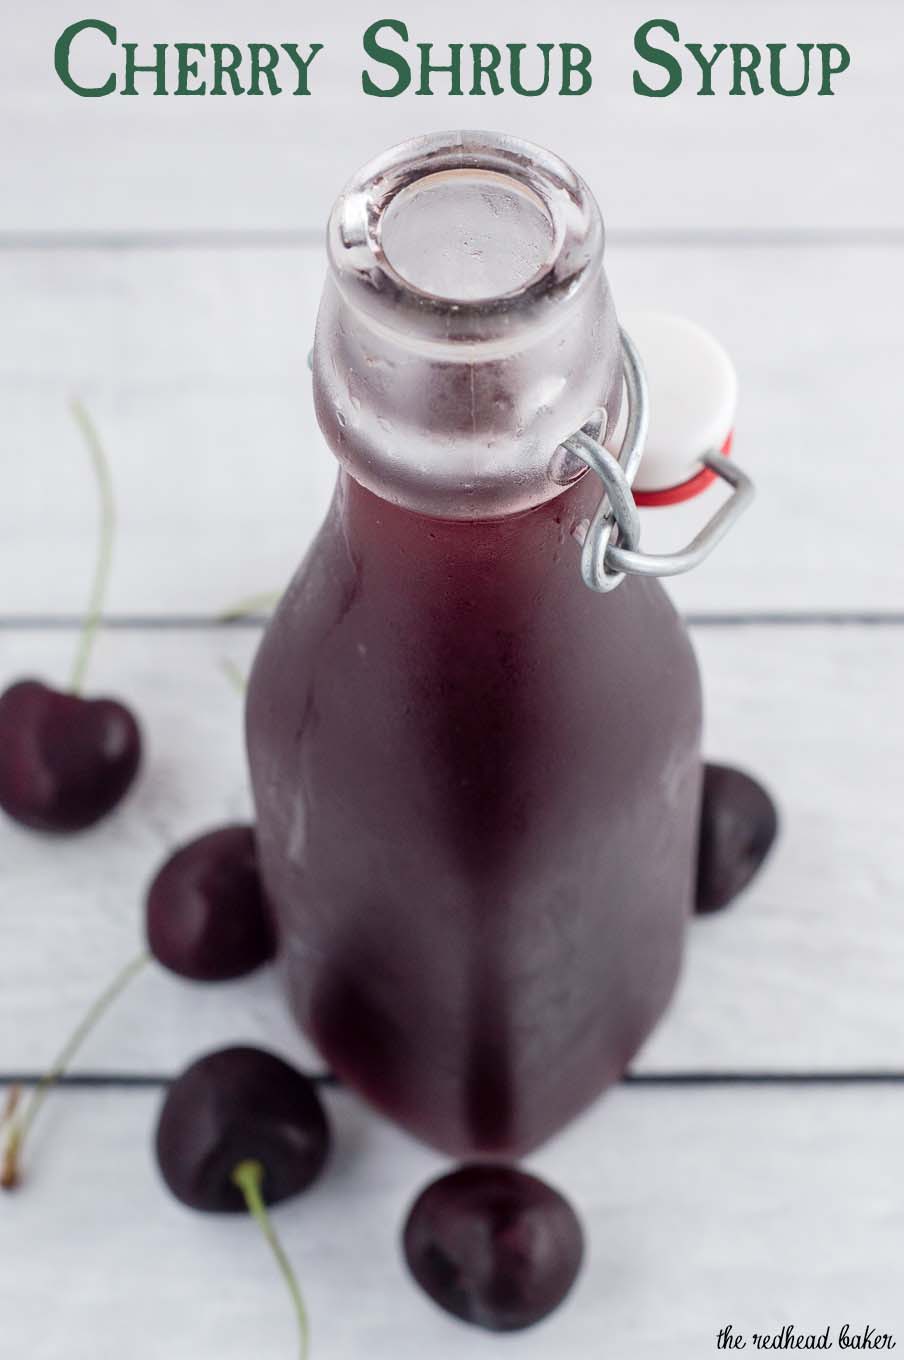 A cherry shrub is a fruit syrup preserved with vinegar, dating back to Colonial America. It can be used to make refreshing cocktails.